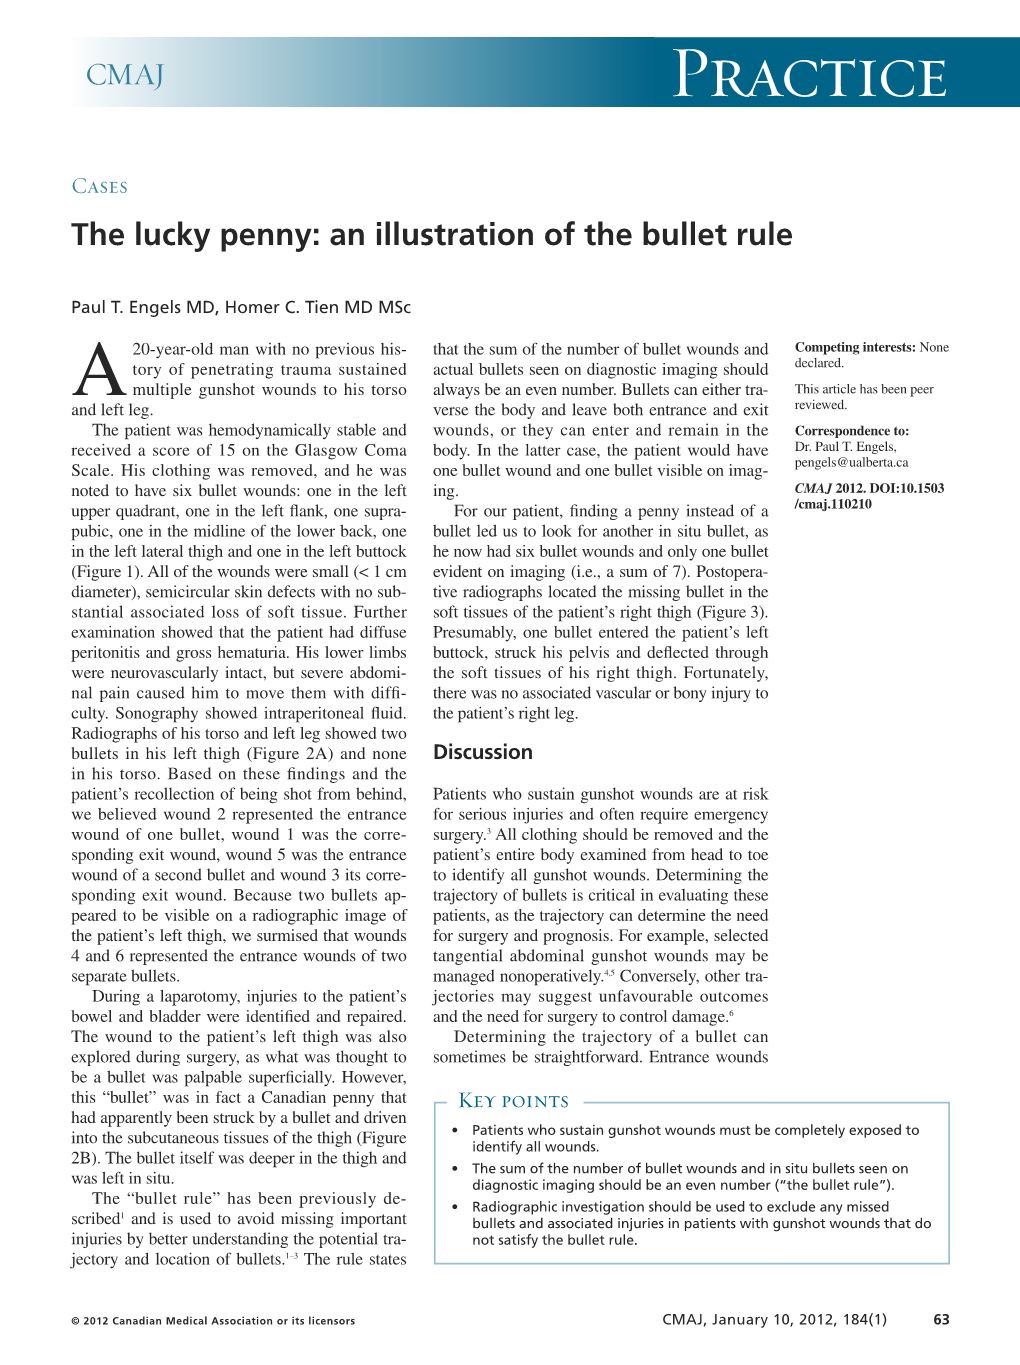 The Lucky Penny: an Illustration of the Bullet Rule